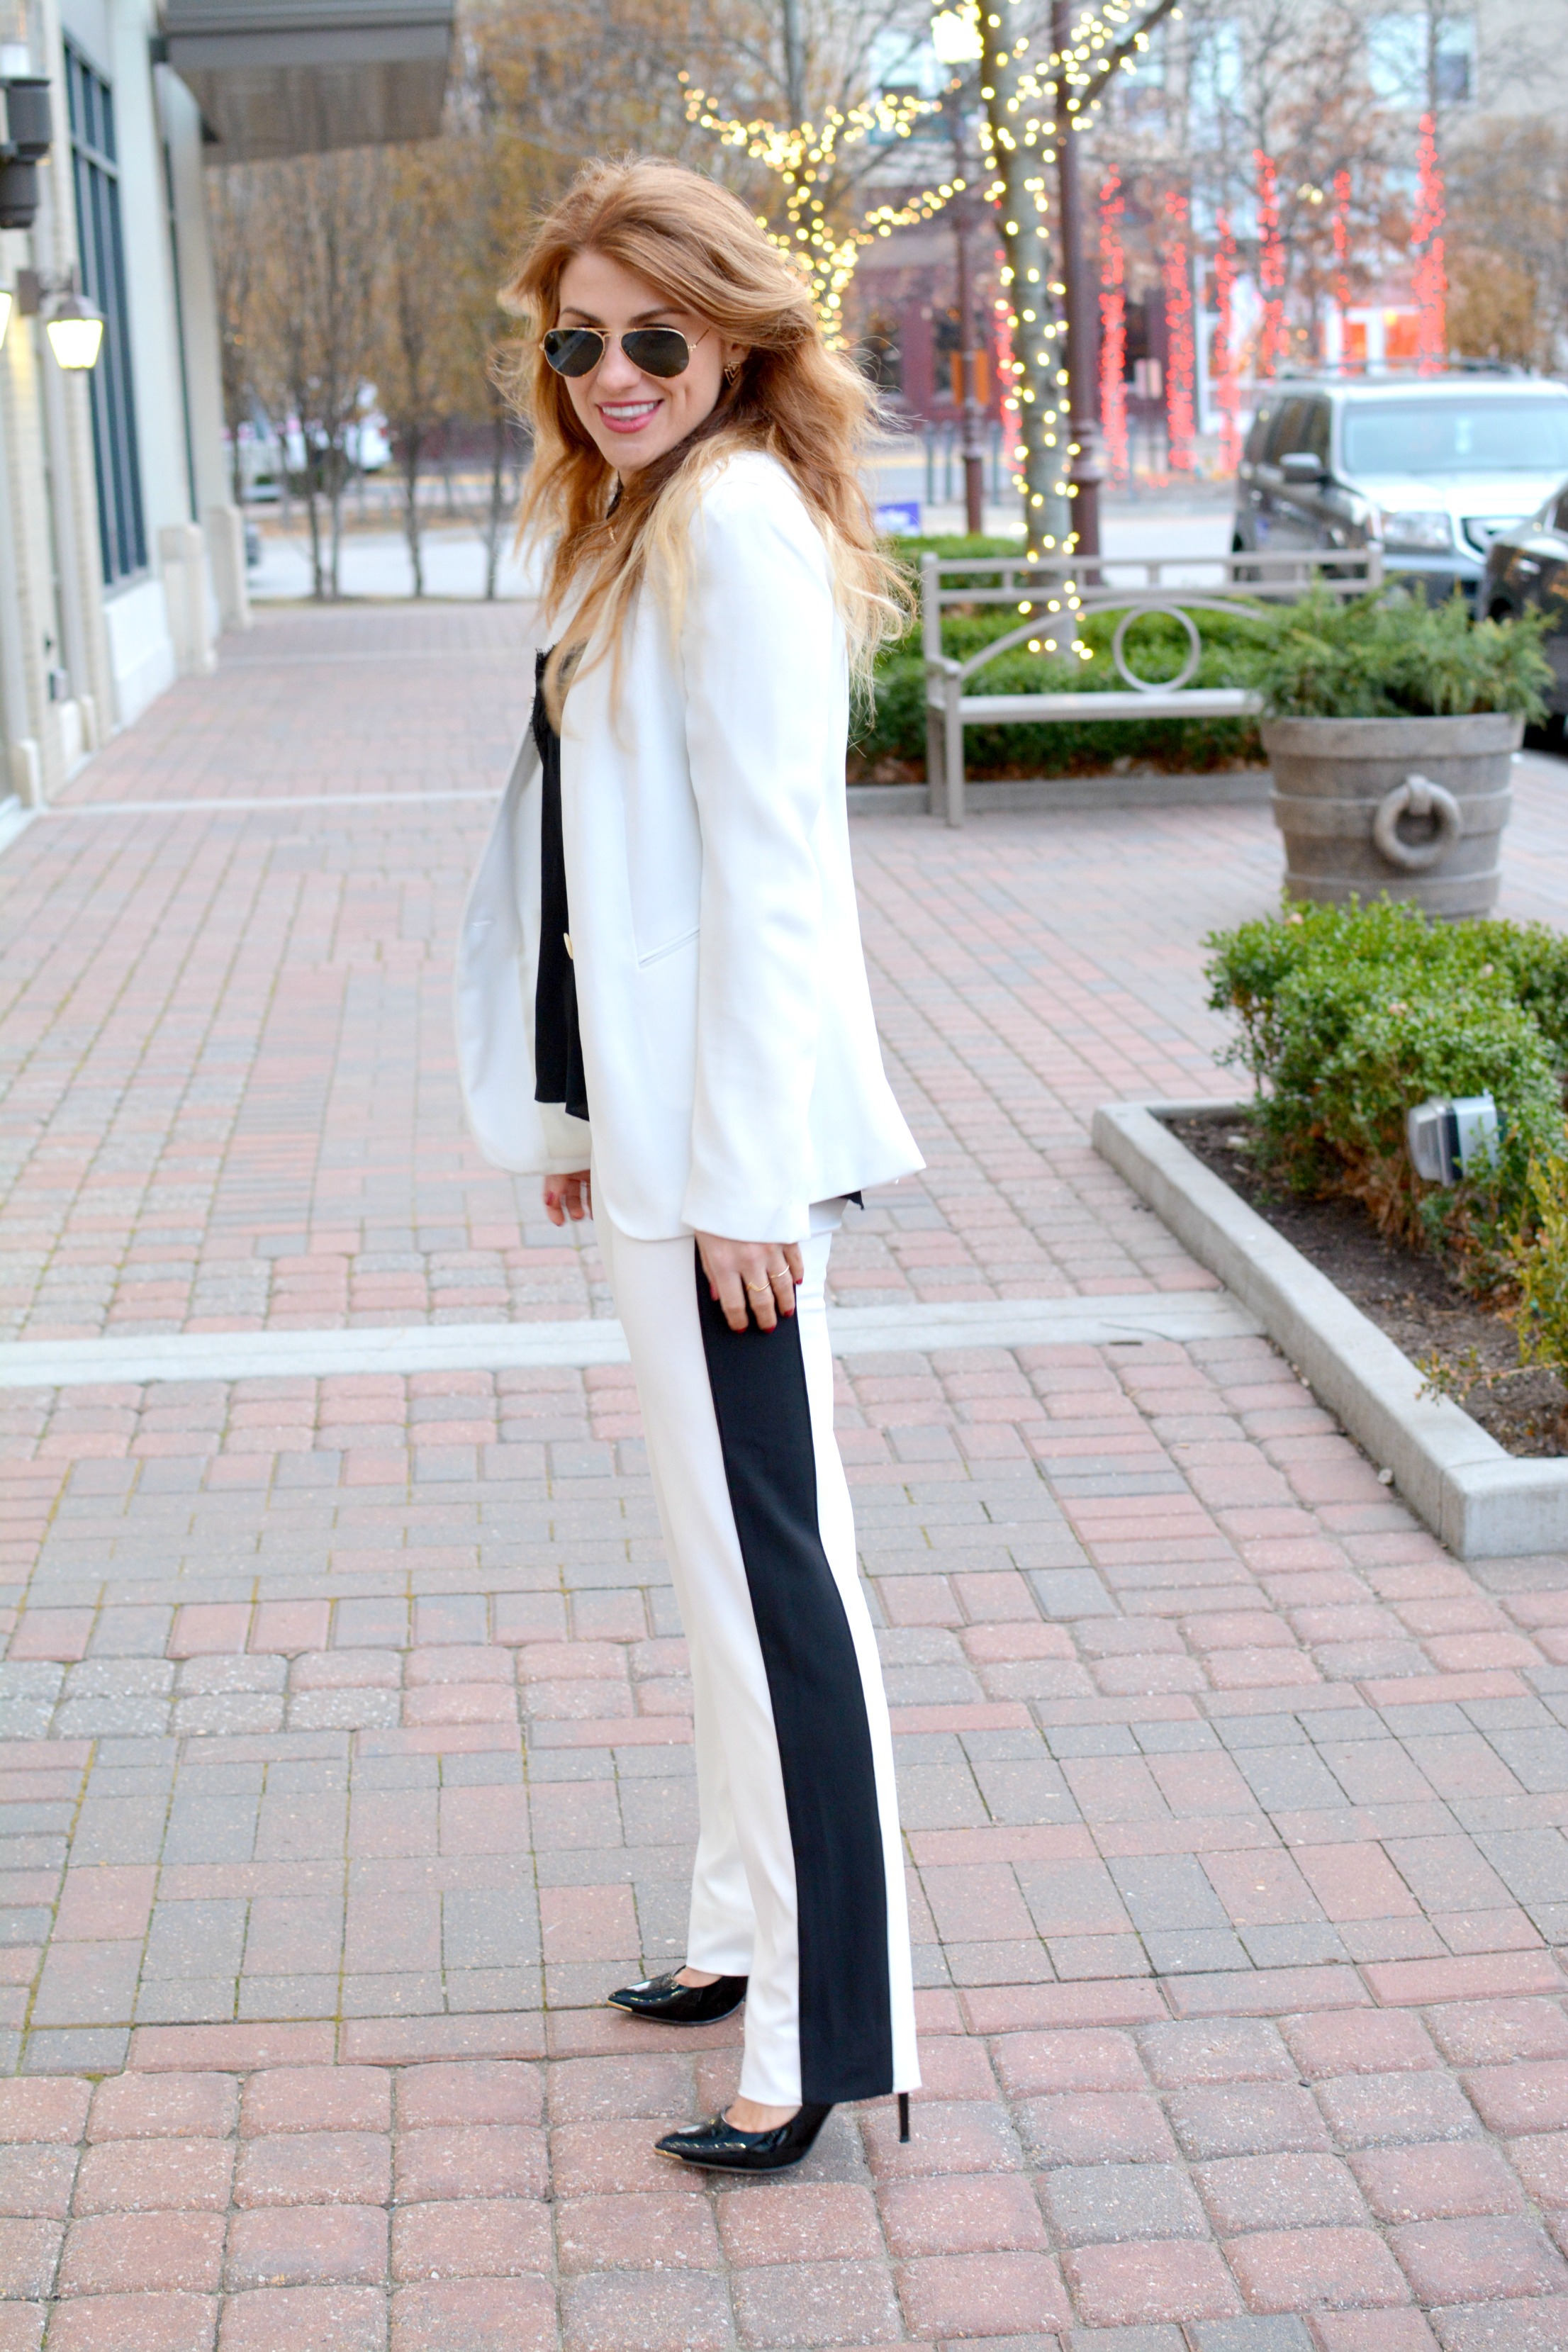 Ashley fro LSR in a white suit and and black pumps